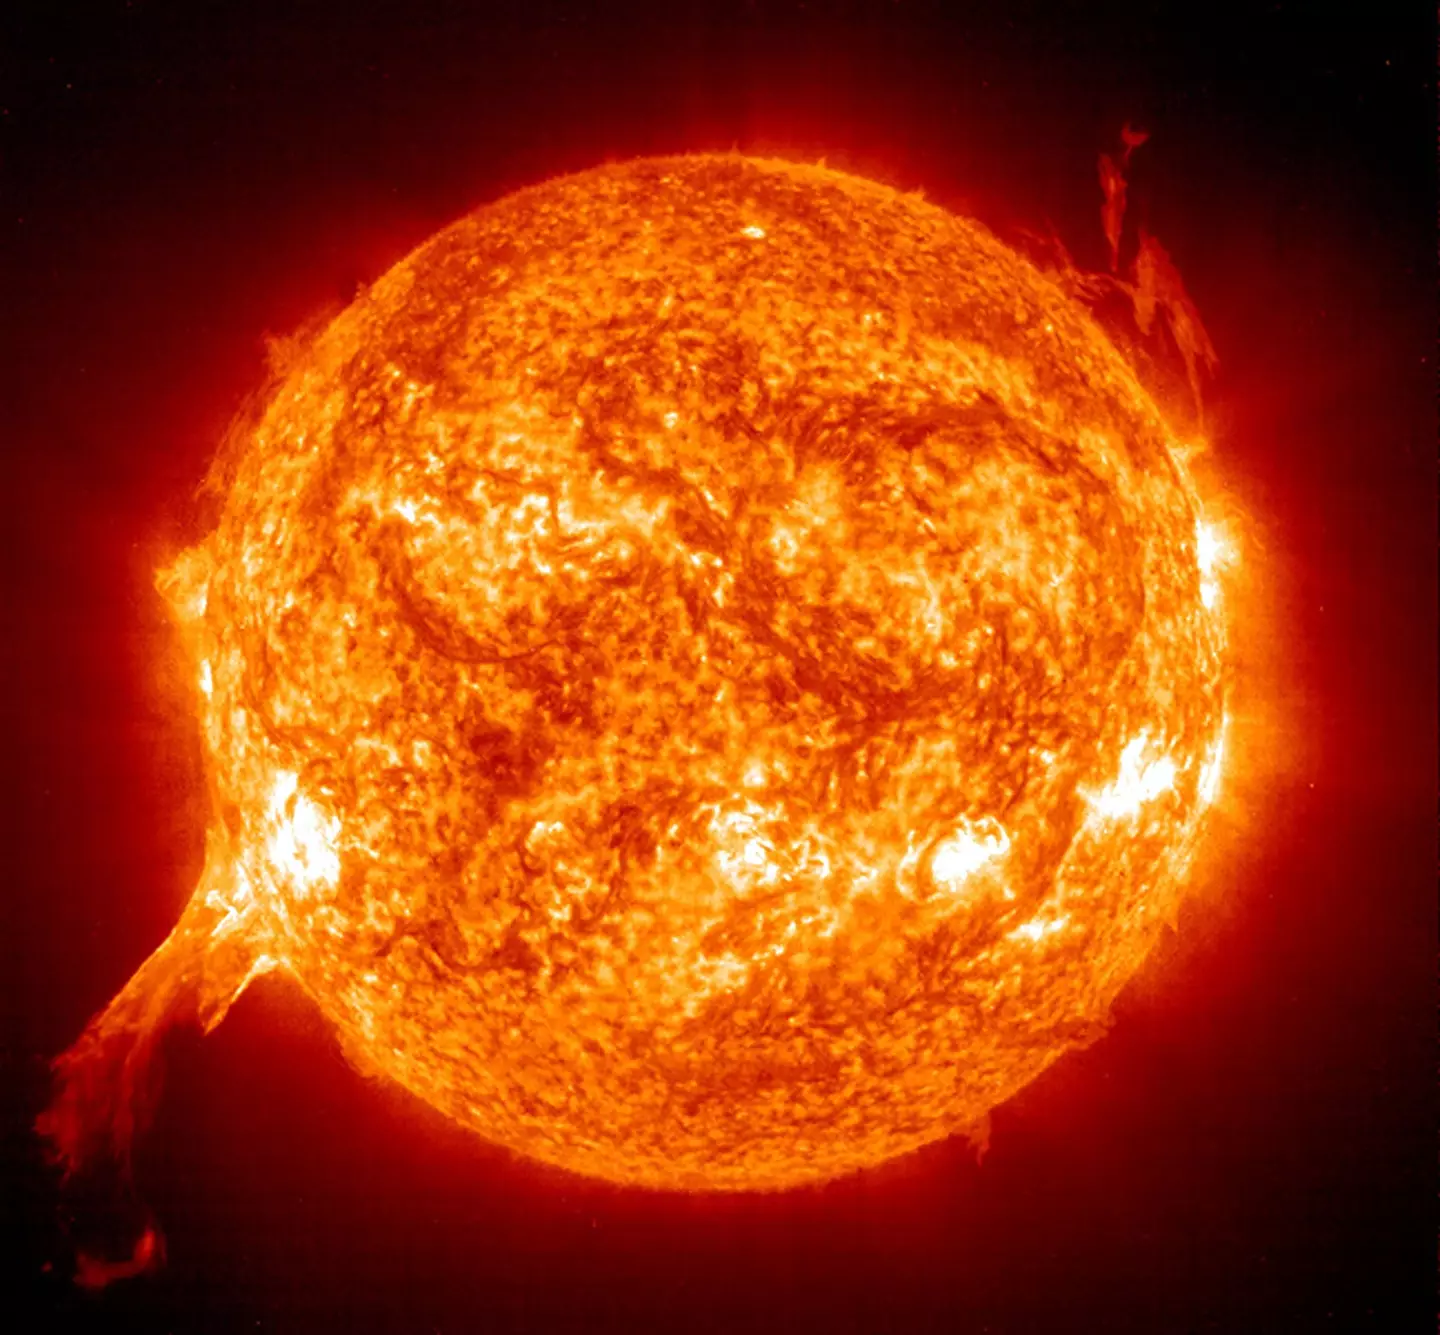 The sun goes through a phase known as a solar maximum where the surfaces begins to display dark spots.